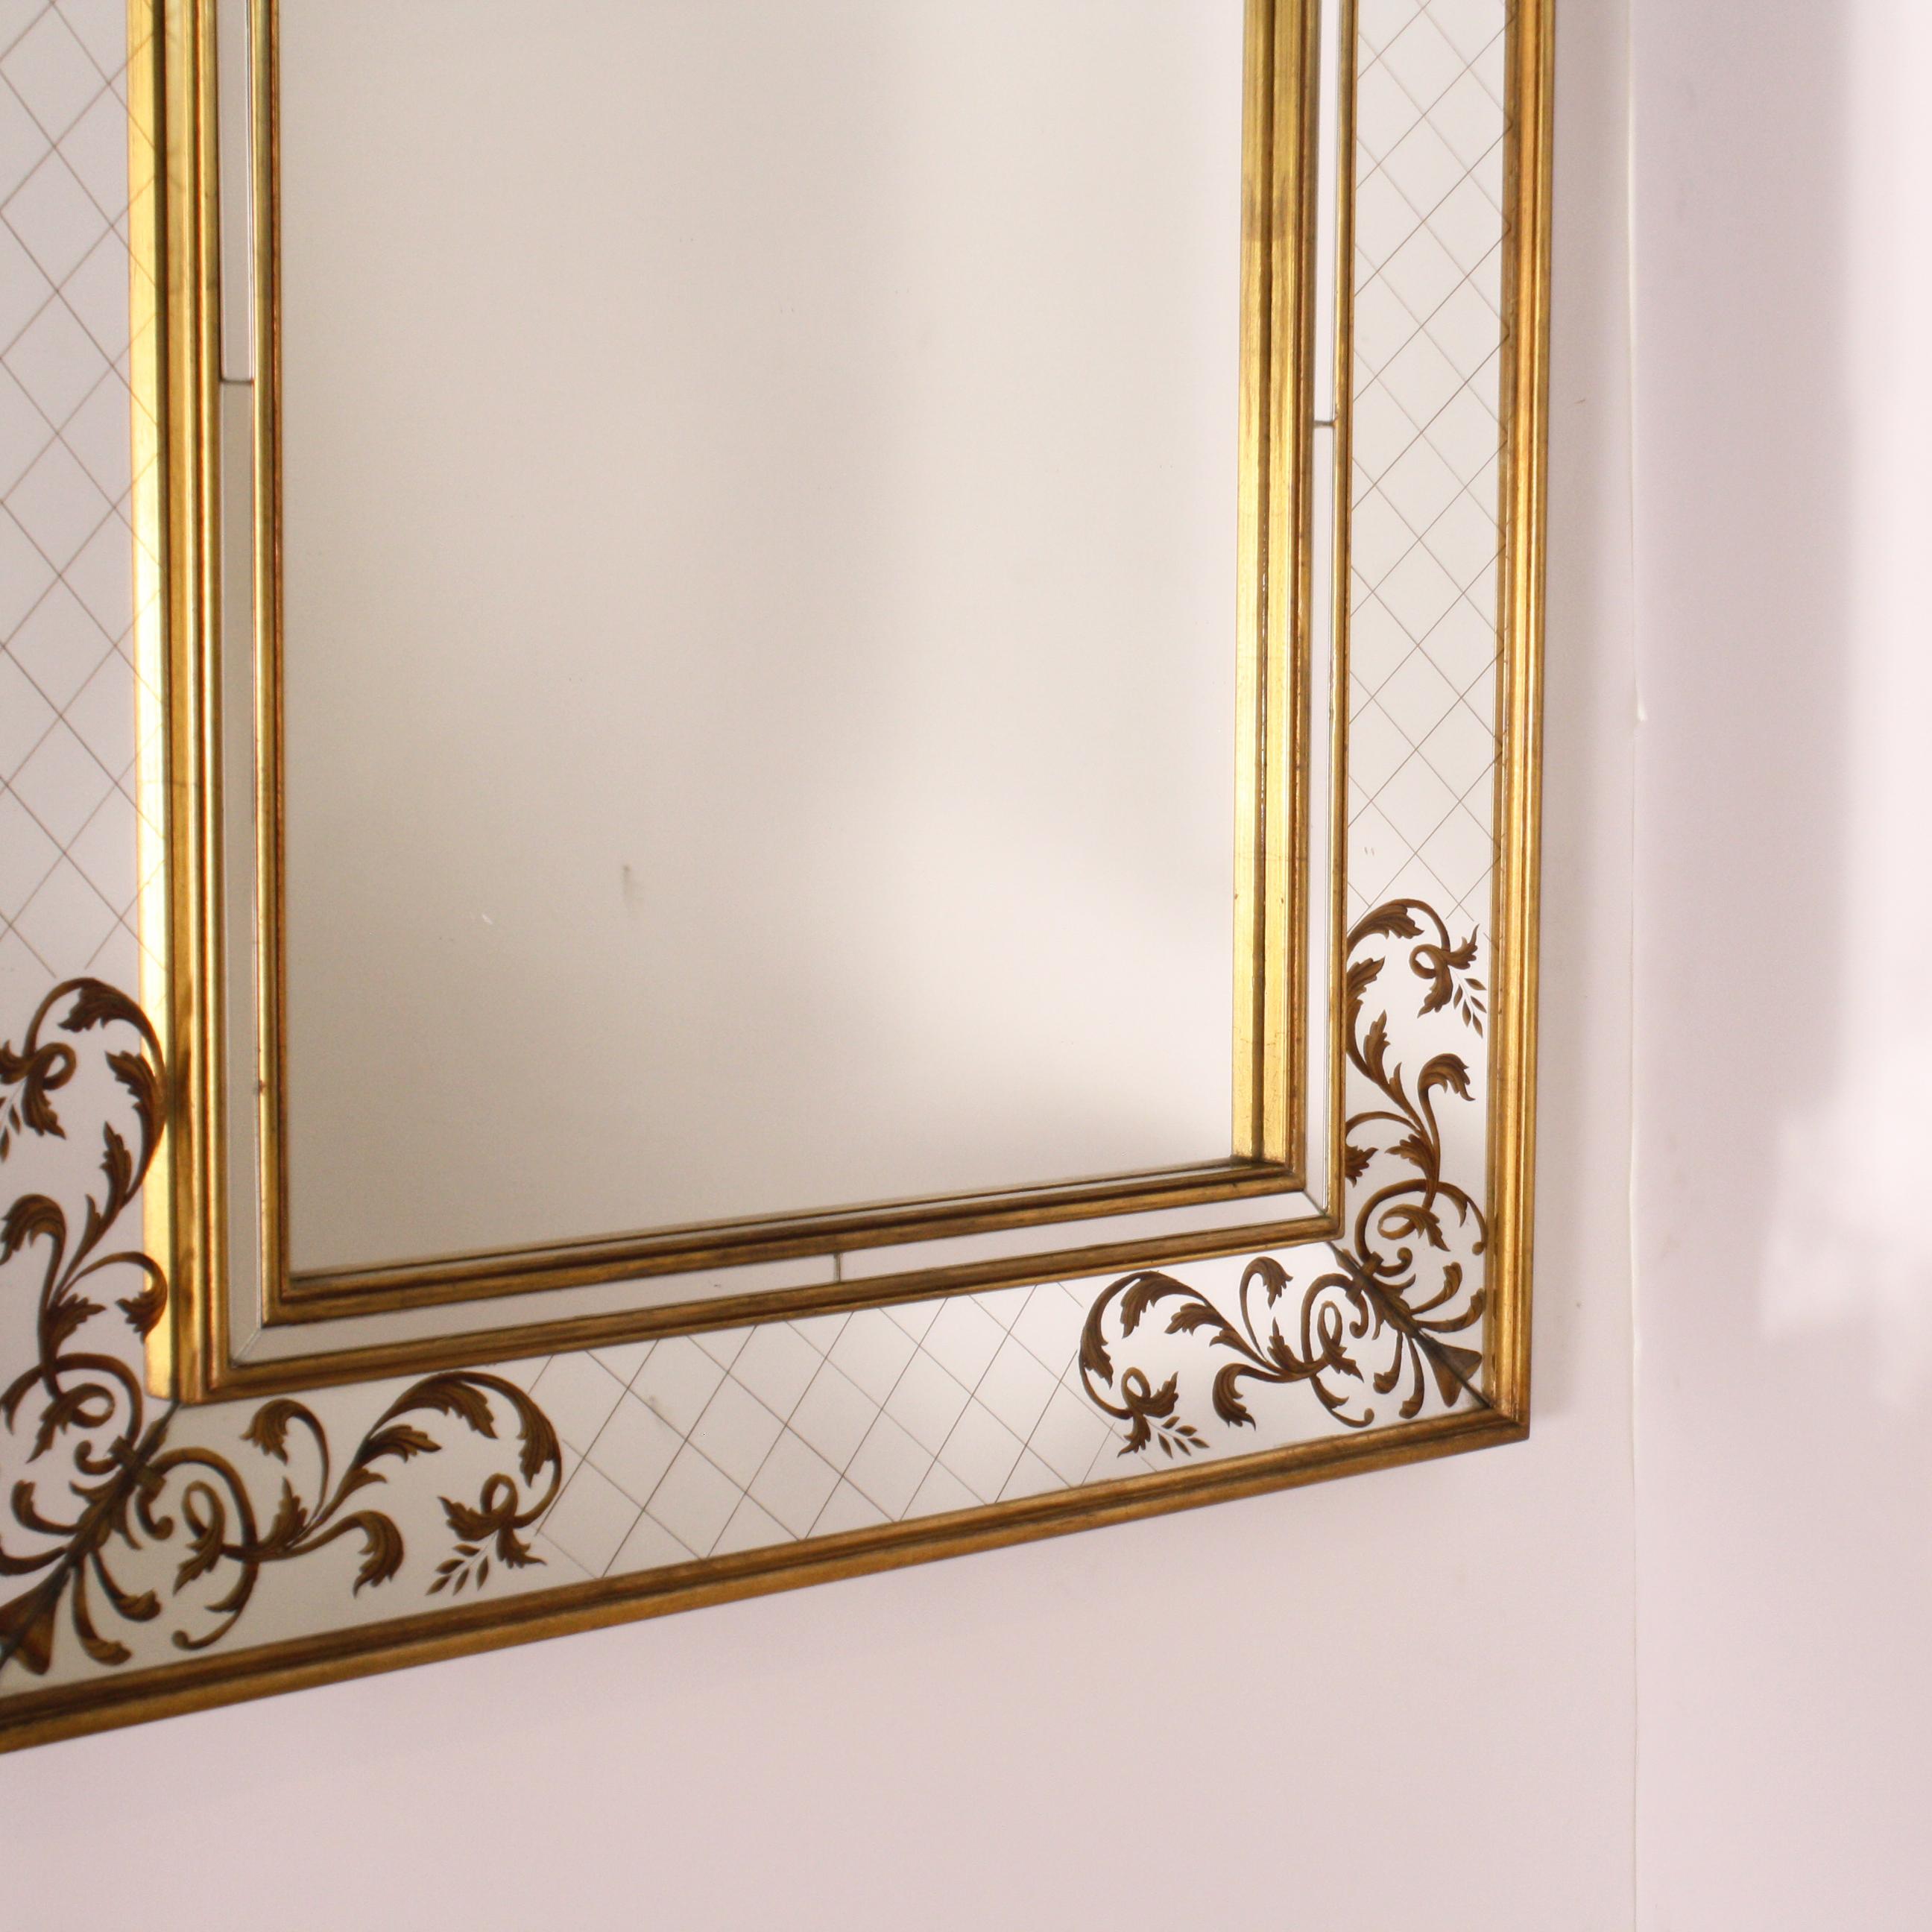 Mid-20th Century French Gold Leaf Églomisé Mirror with Gold Wood Frame, circa 1940